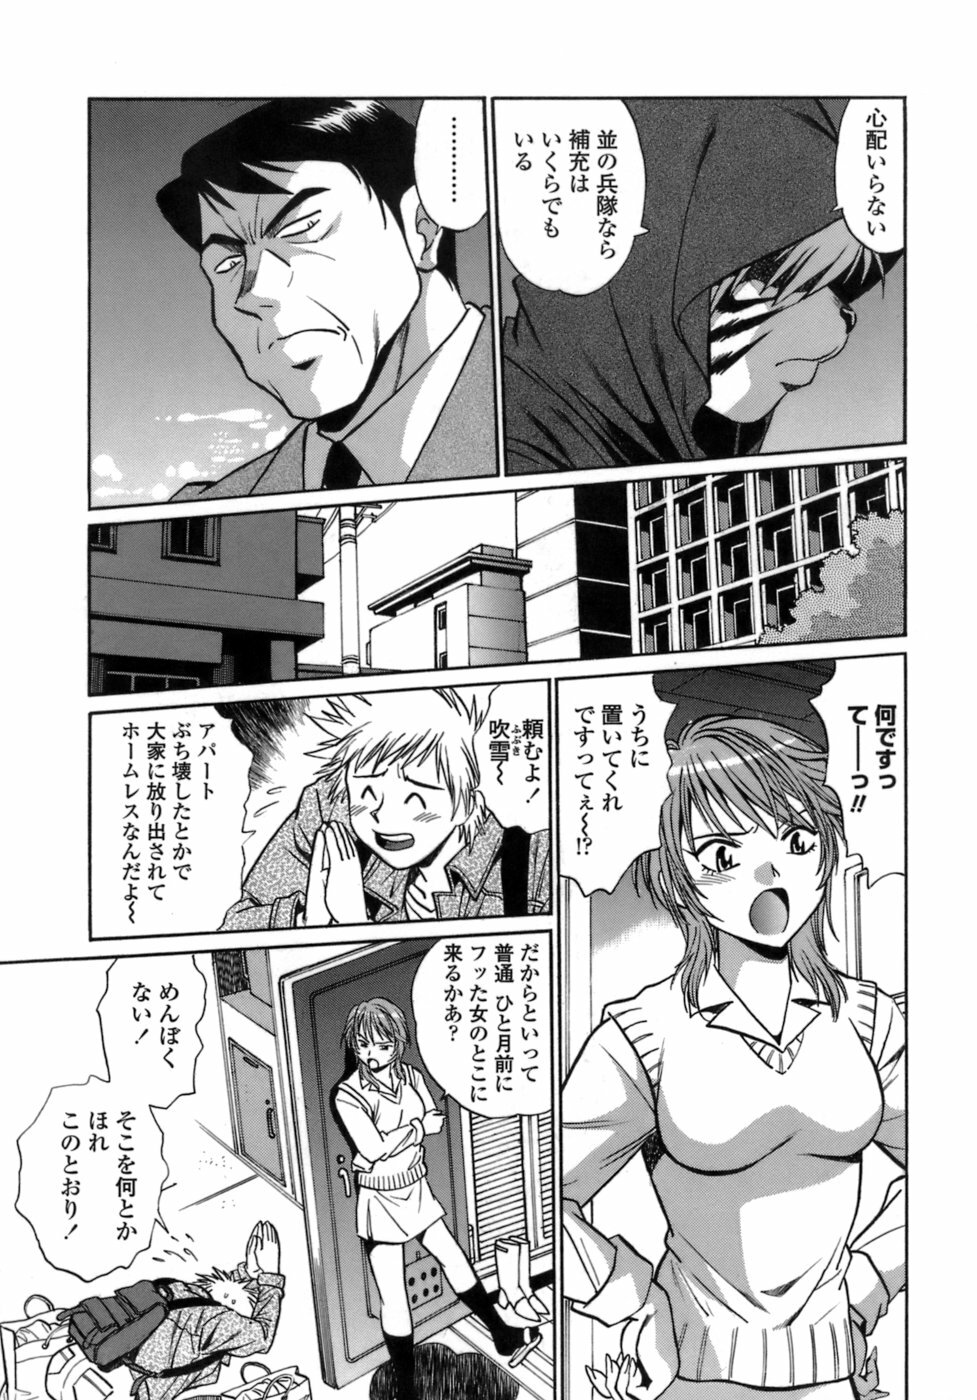 [Manabe Jouji] Tail Chaser 1 page 21 full